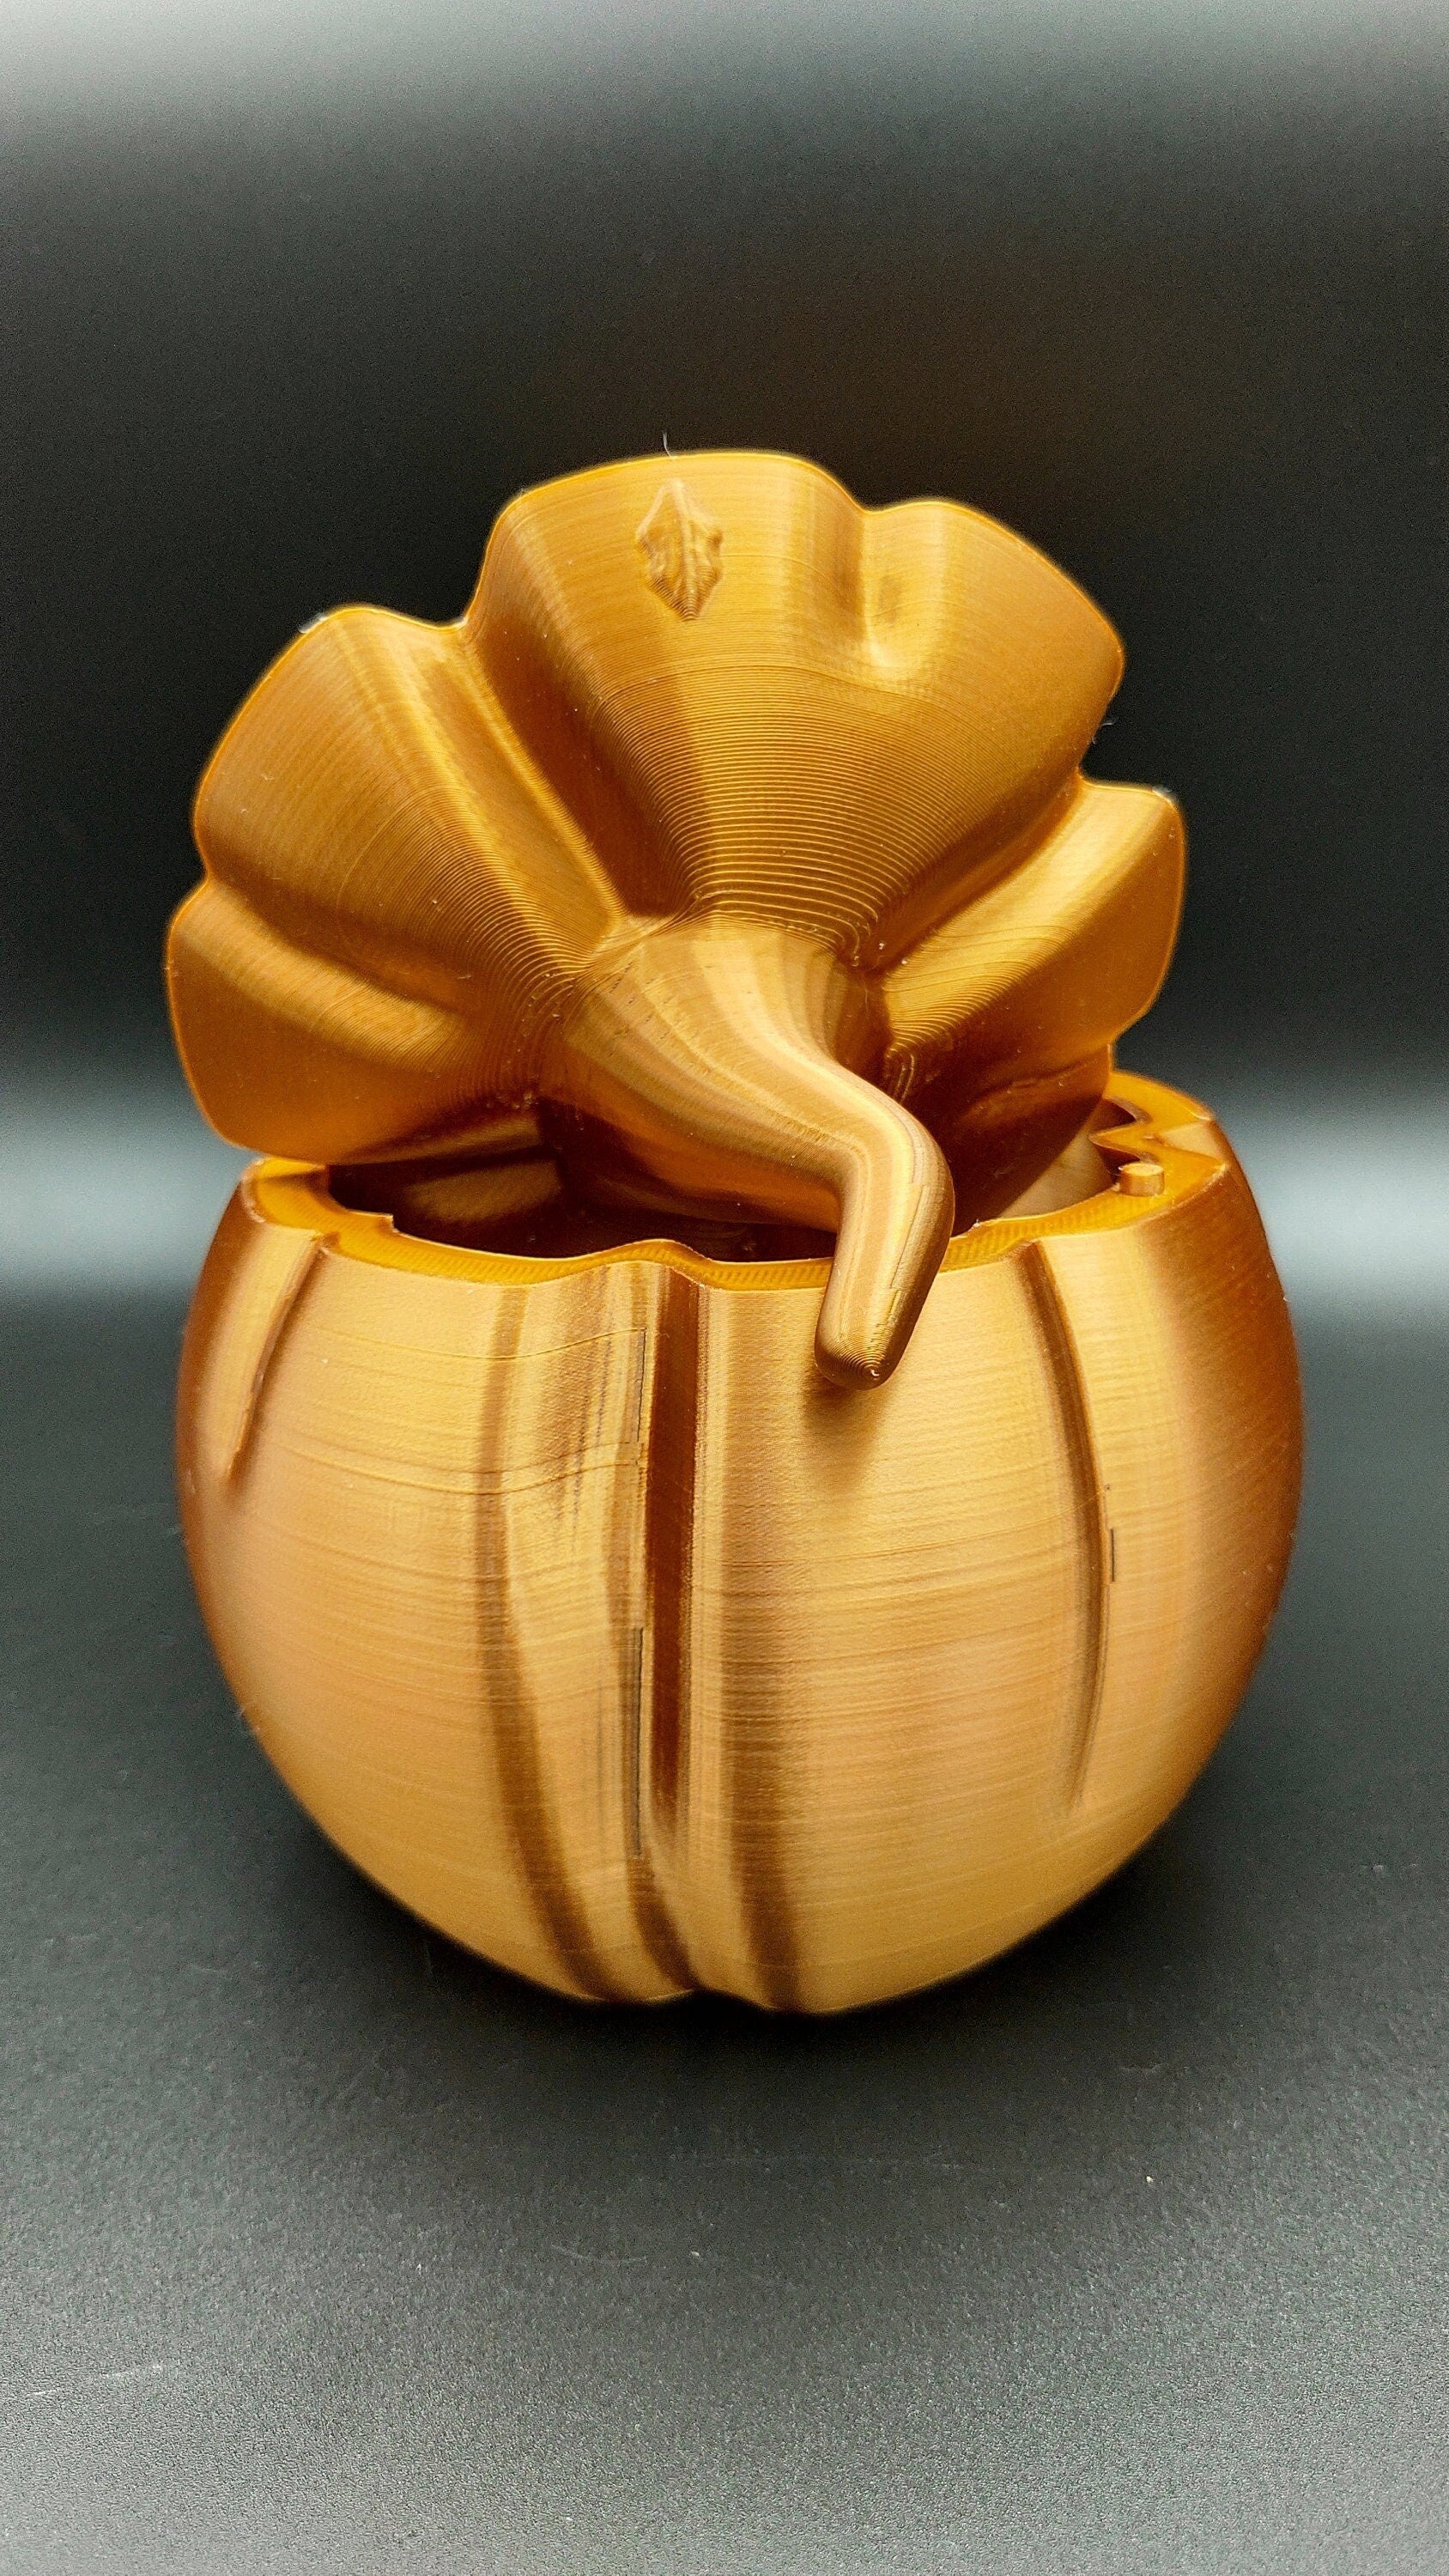 Functional Unique Fall Decor. 15.75 in around, Copper Color Pumpkin Candy Dish, Small Container, Trinket or Jewelry box, Holiday Decoration.